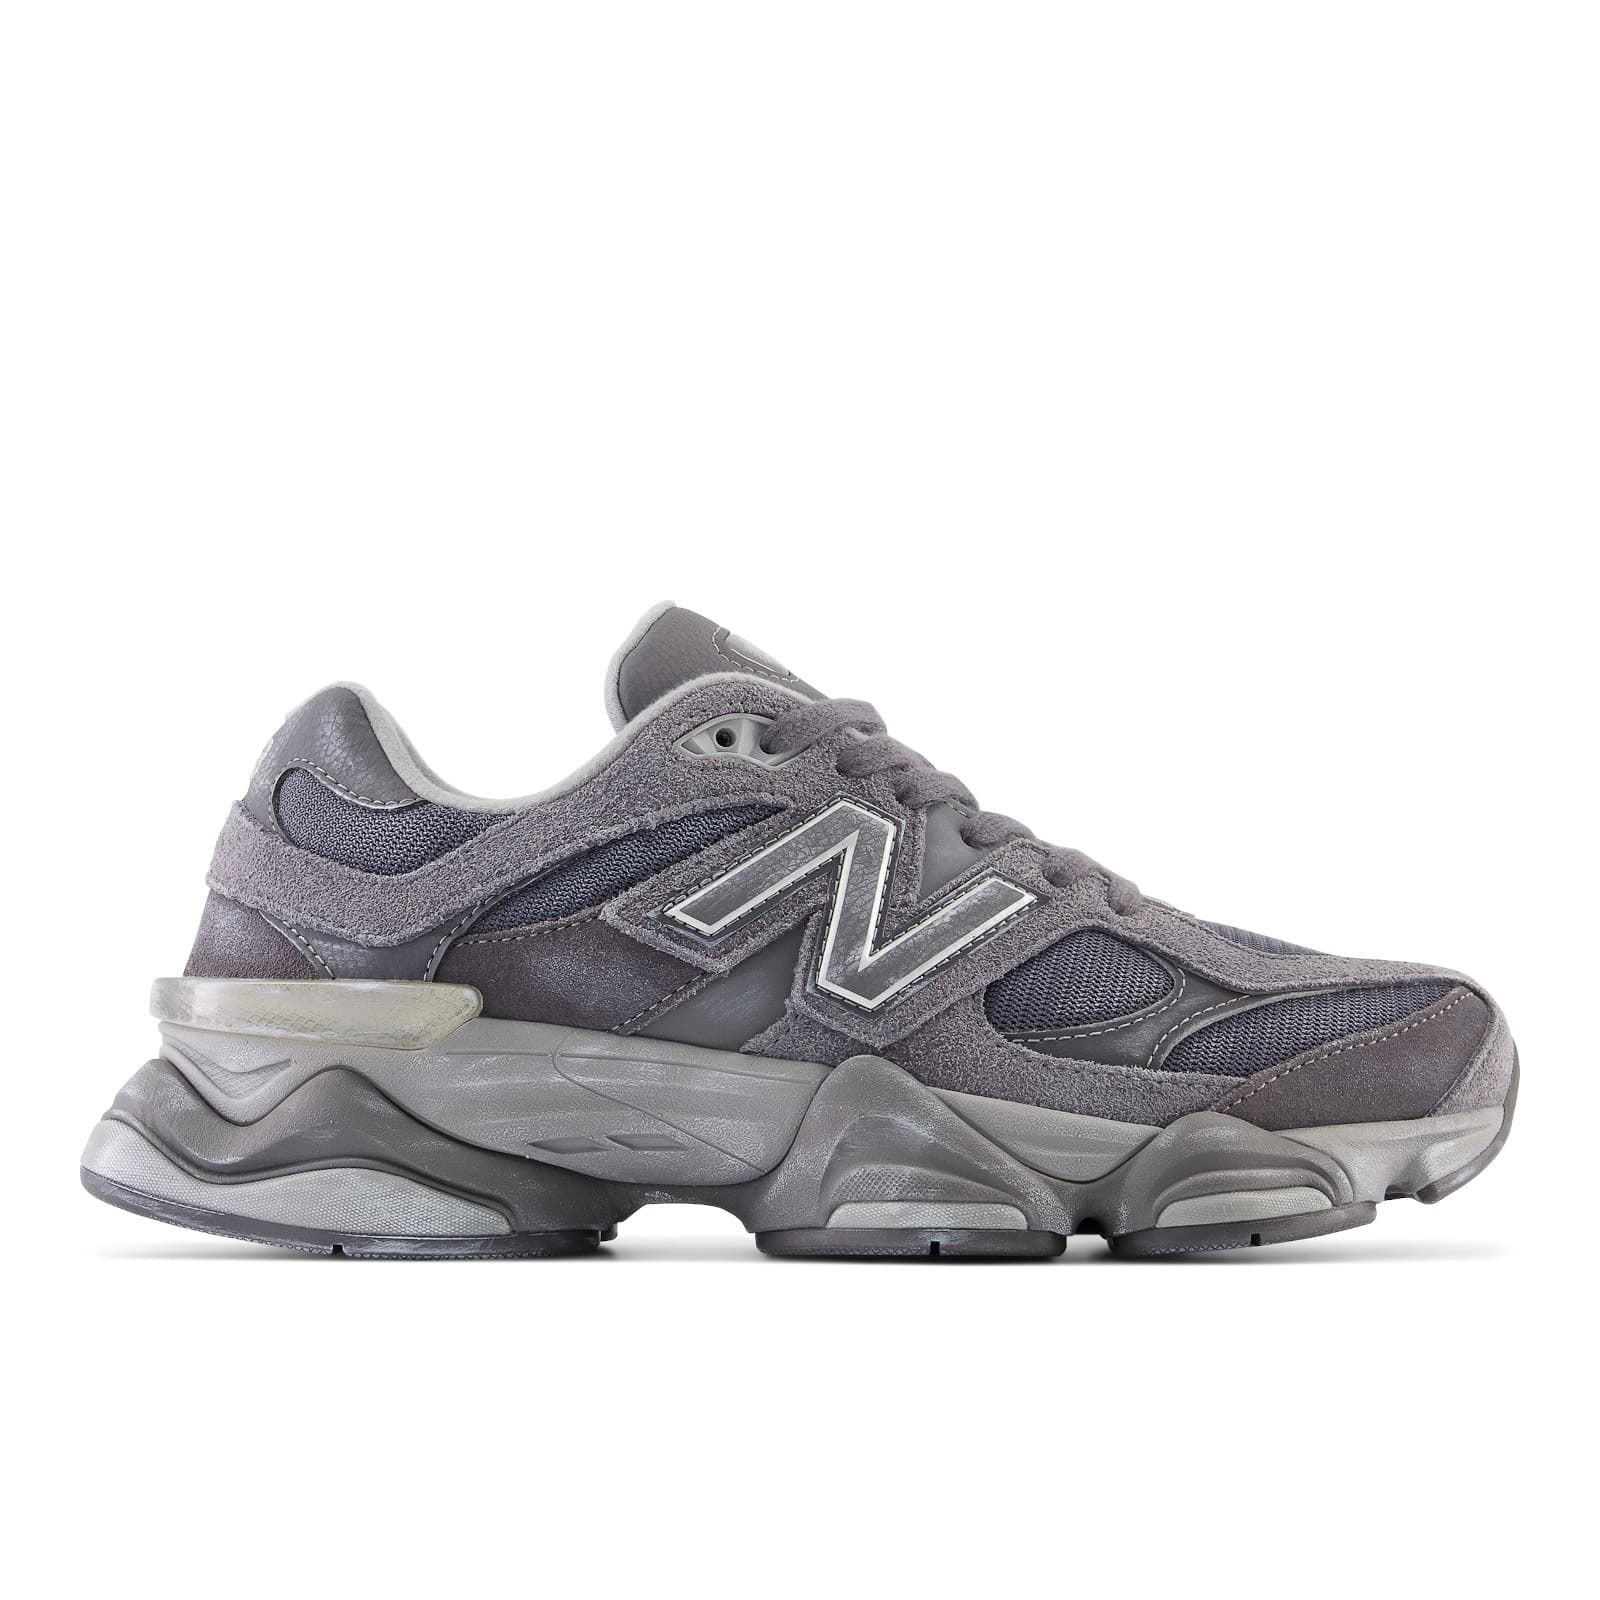 New Balance's 90/60 sneaker in washed blue, brown & grey colorways